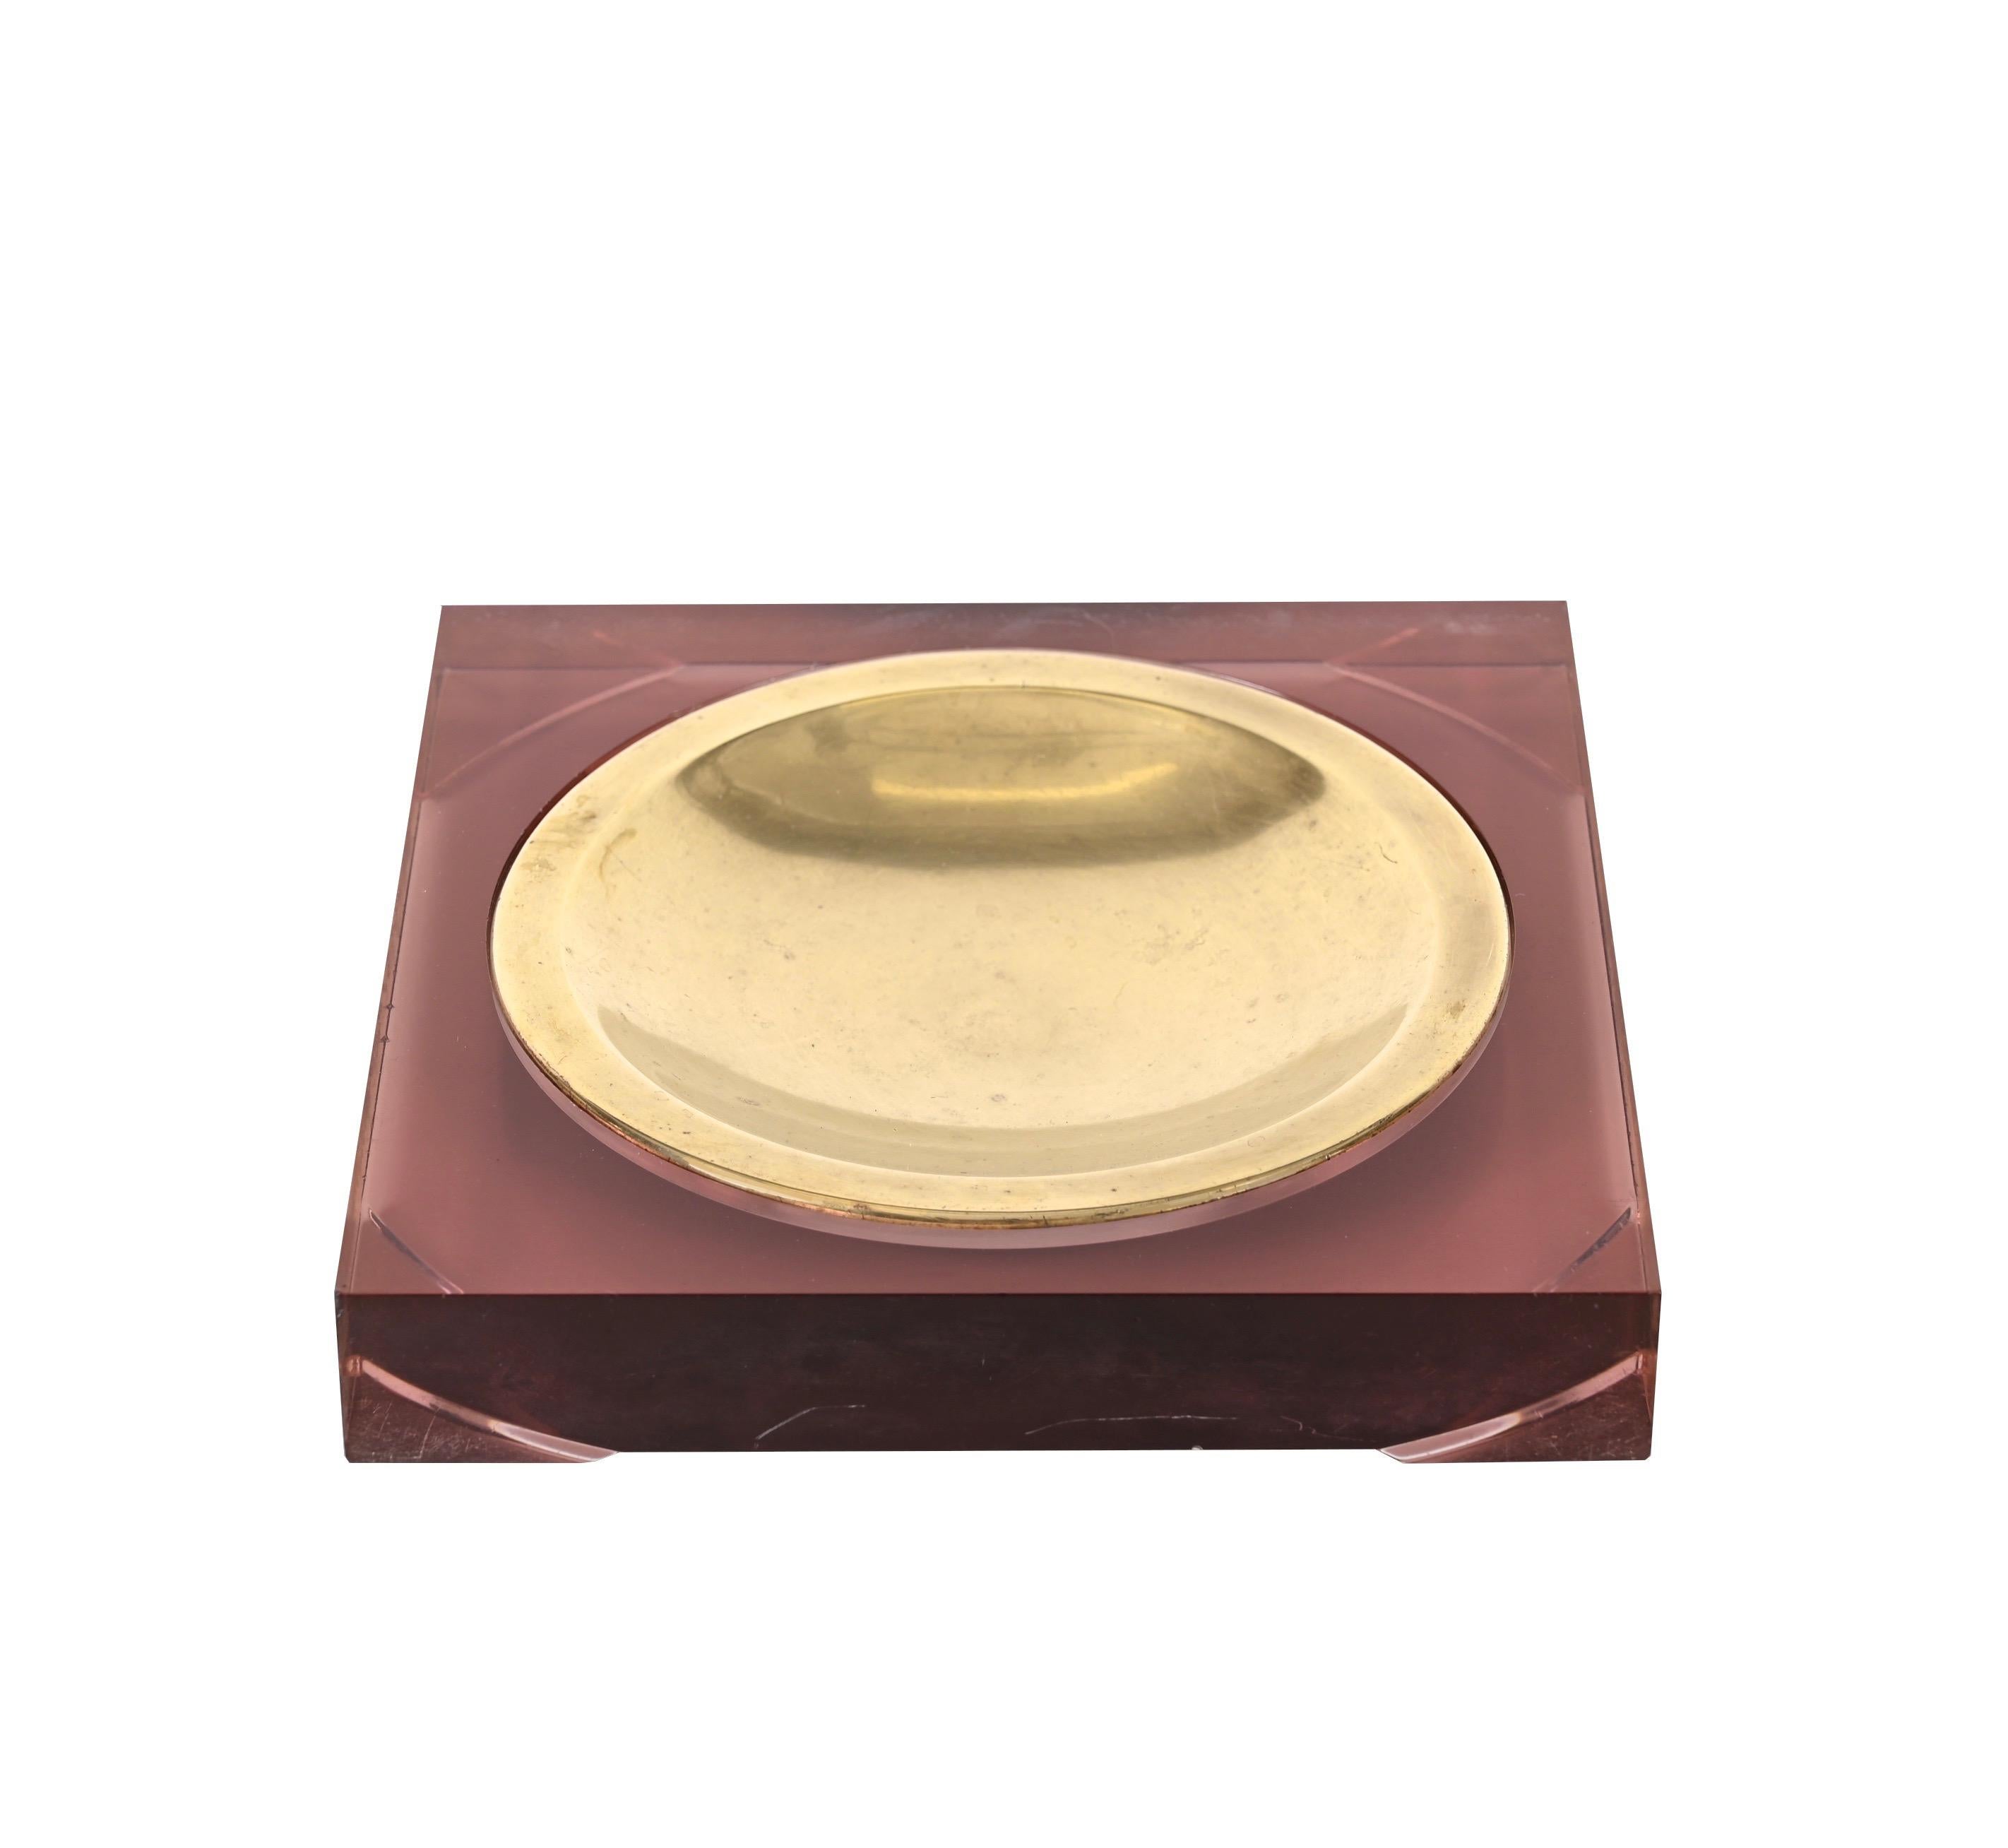 Stunning midcentury lucite and brass squared valet tray. This wonderful item was produced in France in the style of Christian Dior in 1970s.

This vide-poche features a gorgeous pinkish lucite that changes shade depending on the light and pairs